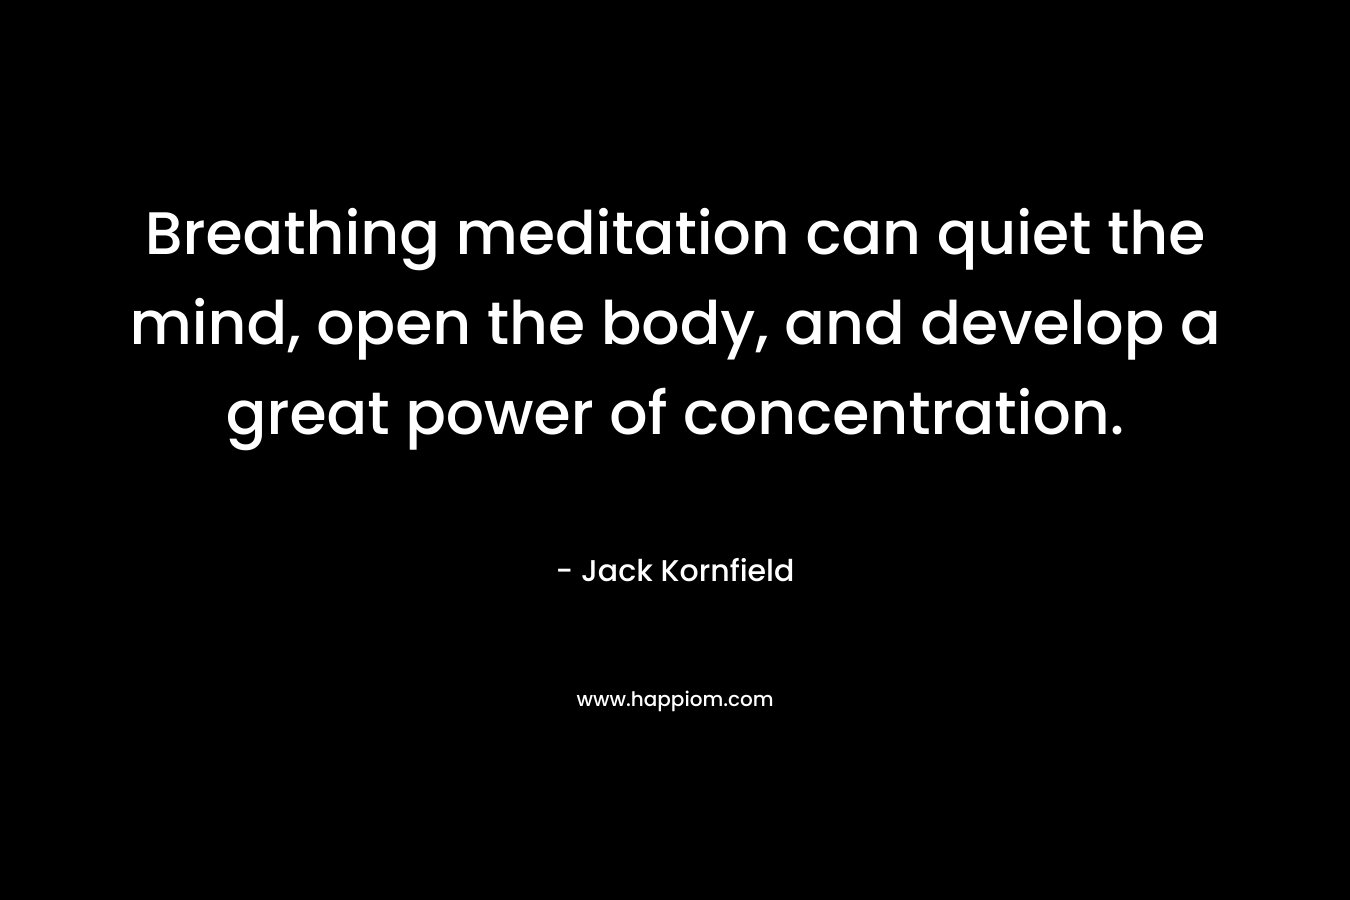 Breathing meditation can quiet the mind, open the body, and develop a great power of concentration.